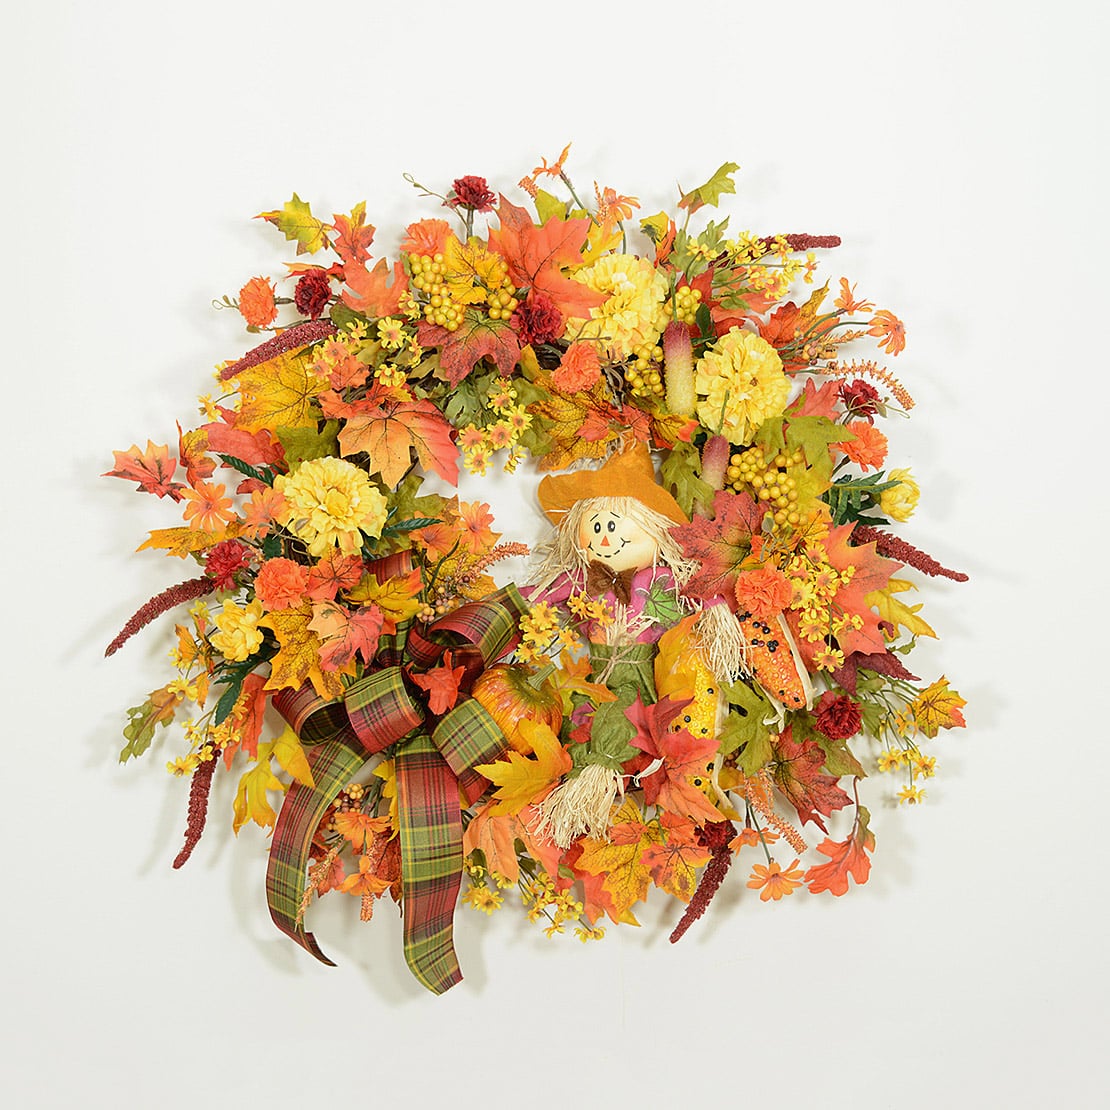 Autumn Greetings Scarecrow Wreath - Wreaths Unlimited